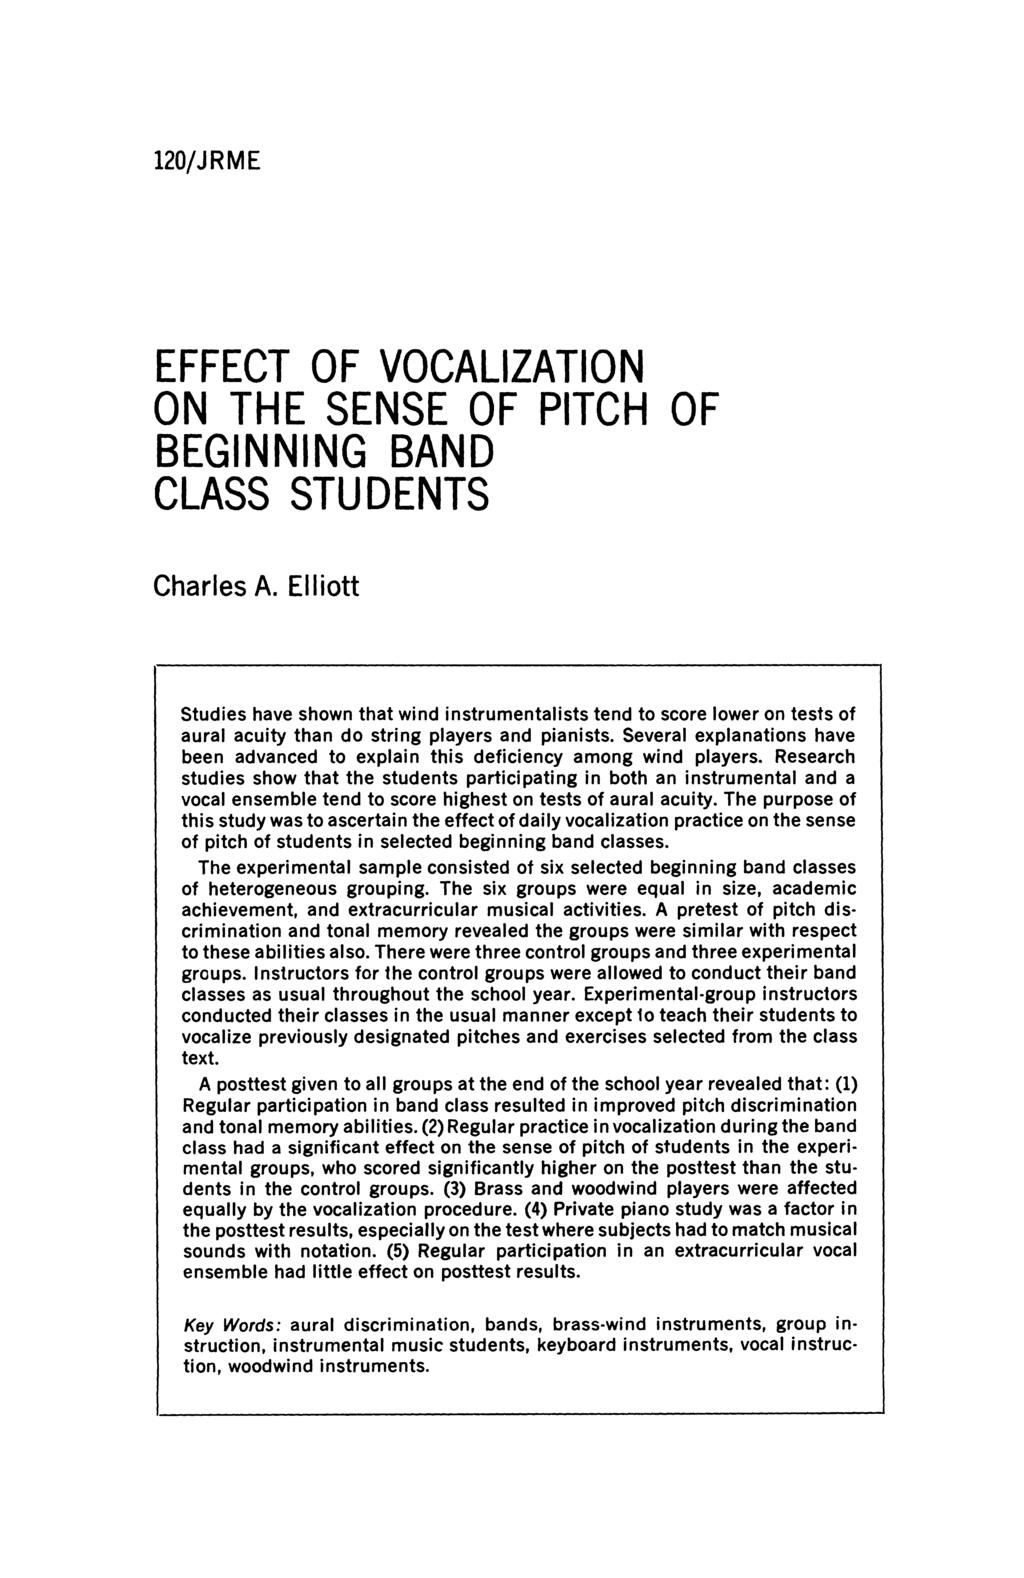 120/JRME EFFECT OF VOCALIZATION ON THE SENSE OF PITCH OF BEGINNING BAND CLASS STUDENTS Charles A.